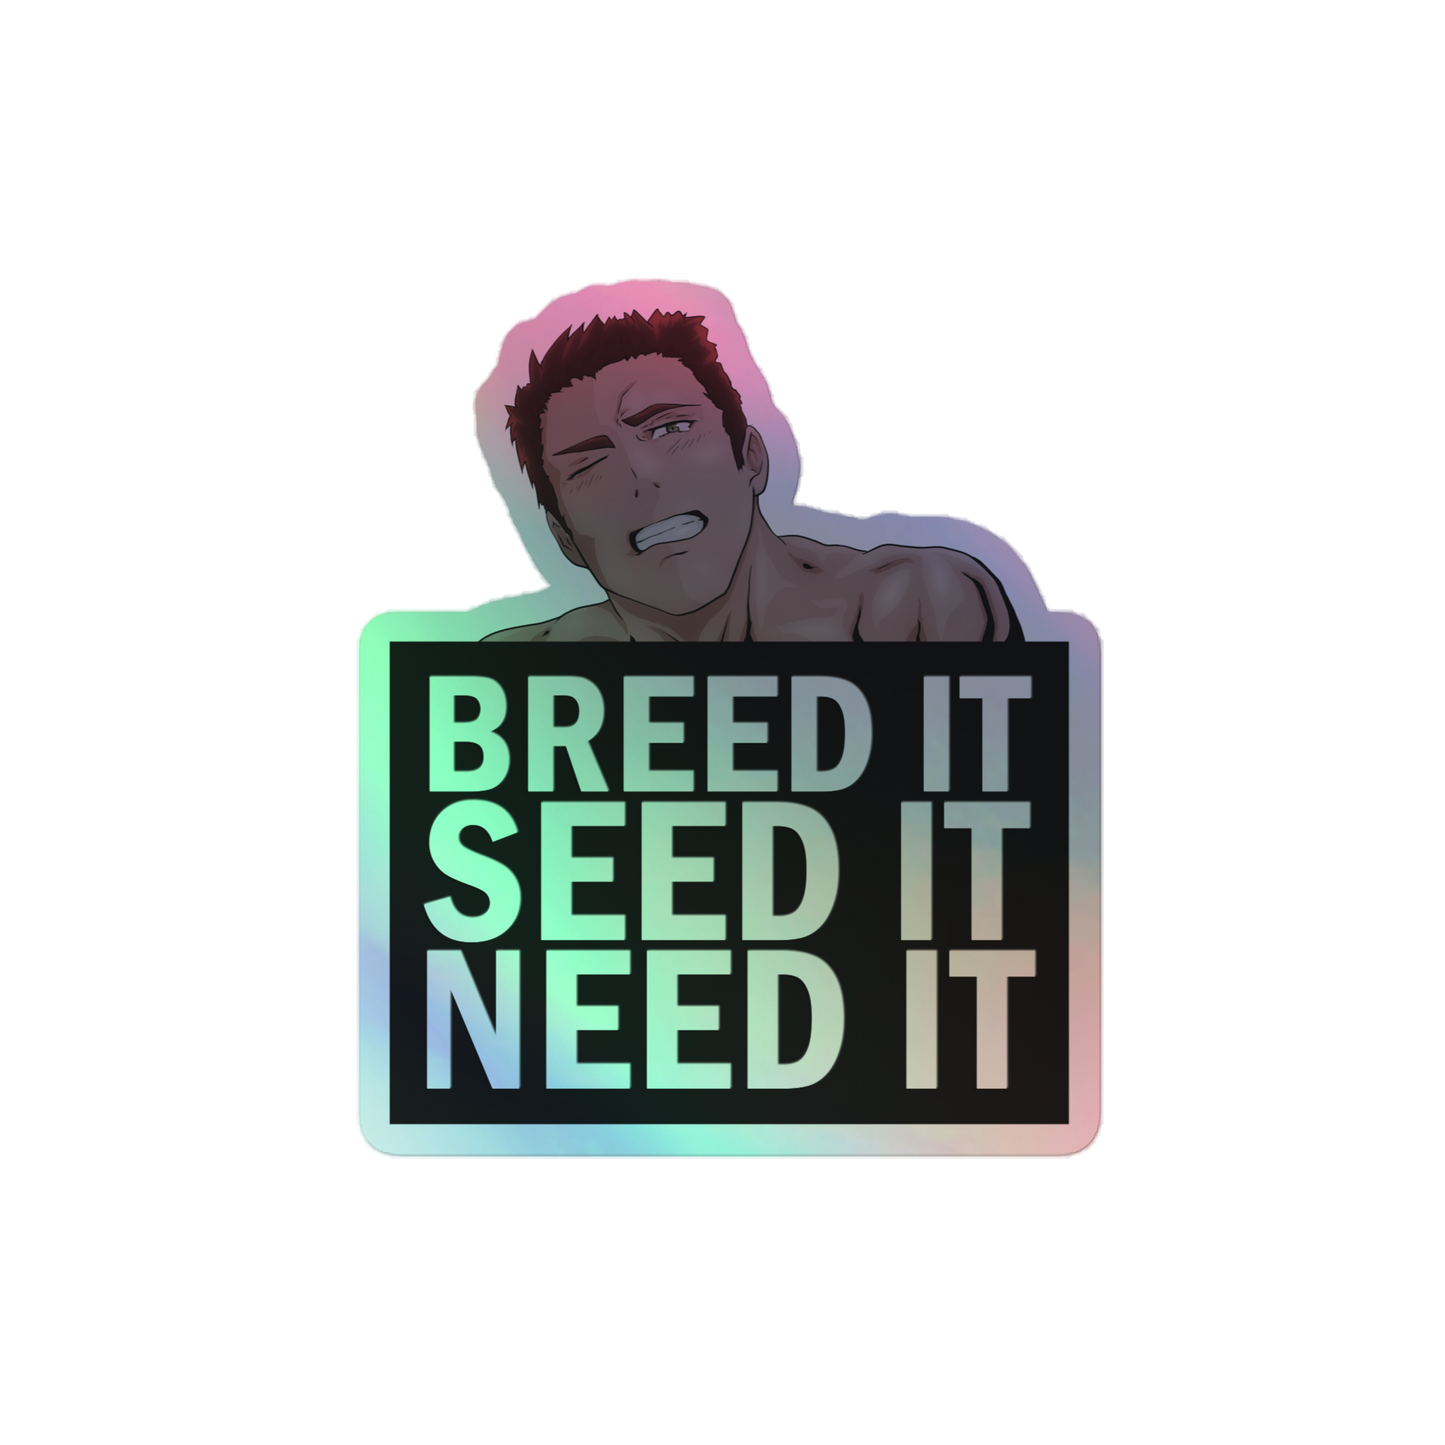 Holographic Breed It, Seed It, Need It, Sticker